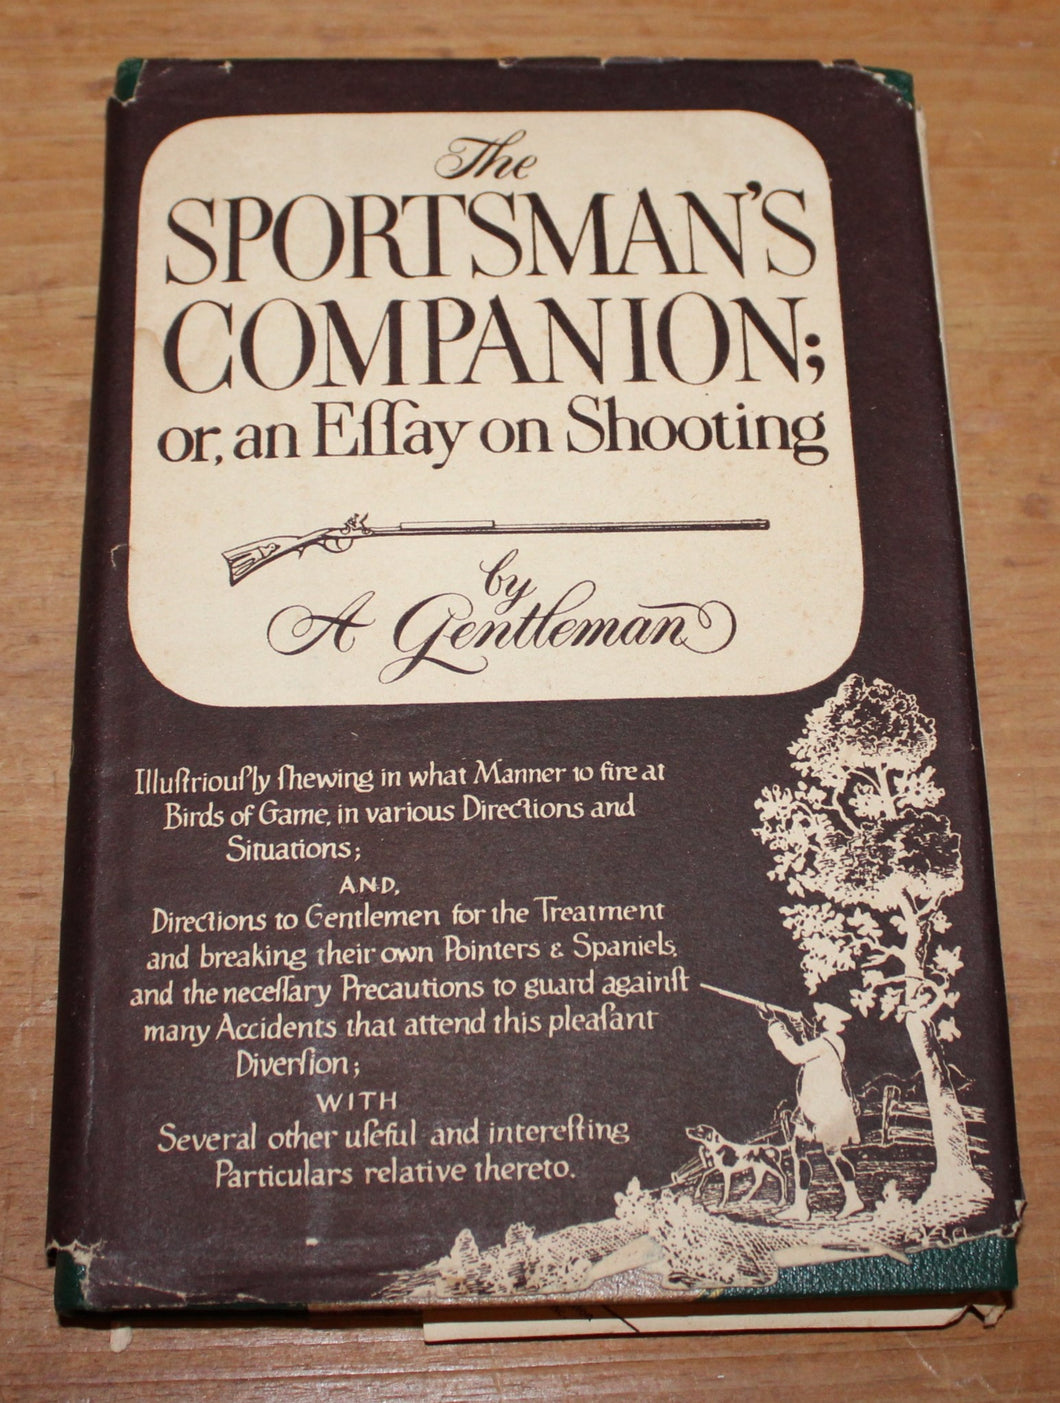 The Sportsman’s Companion or, an Essay on Shooting by A Gentleman